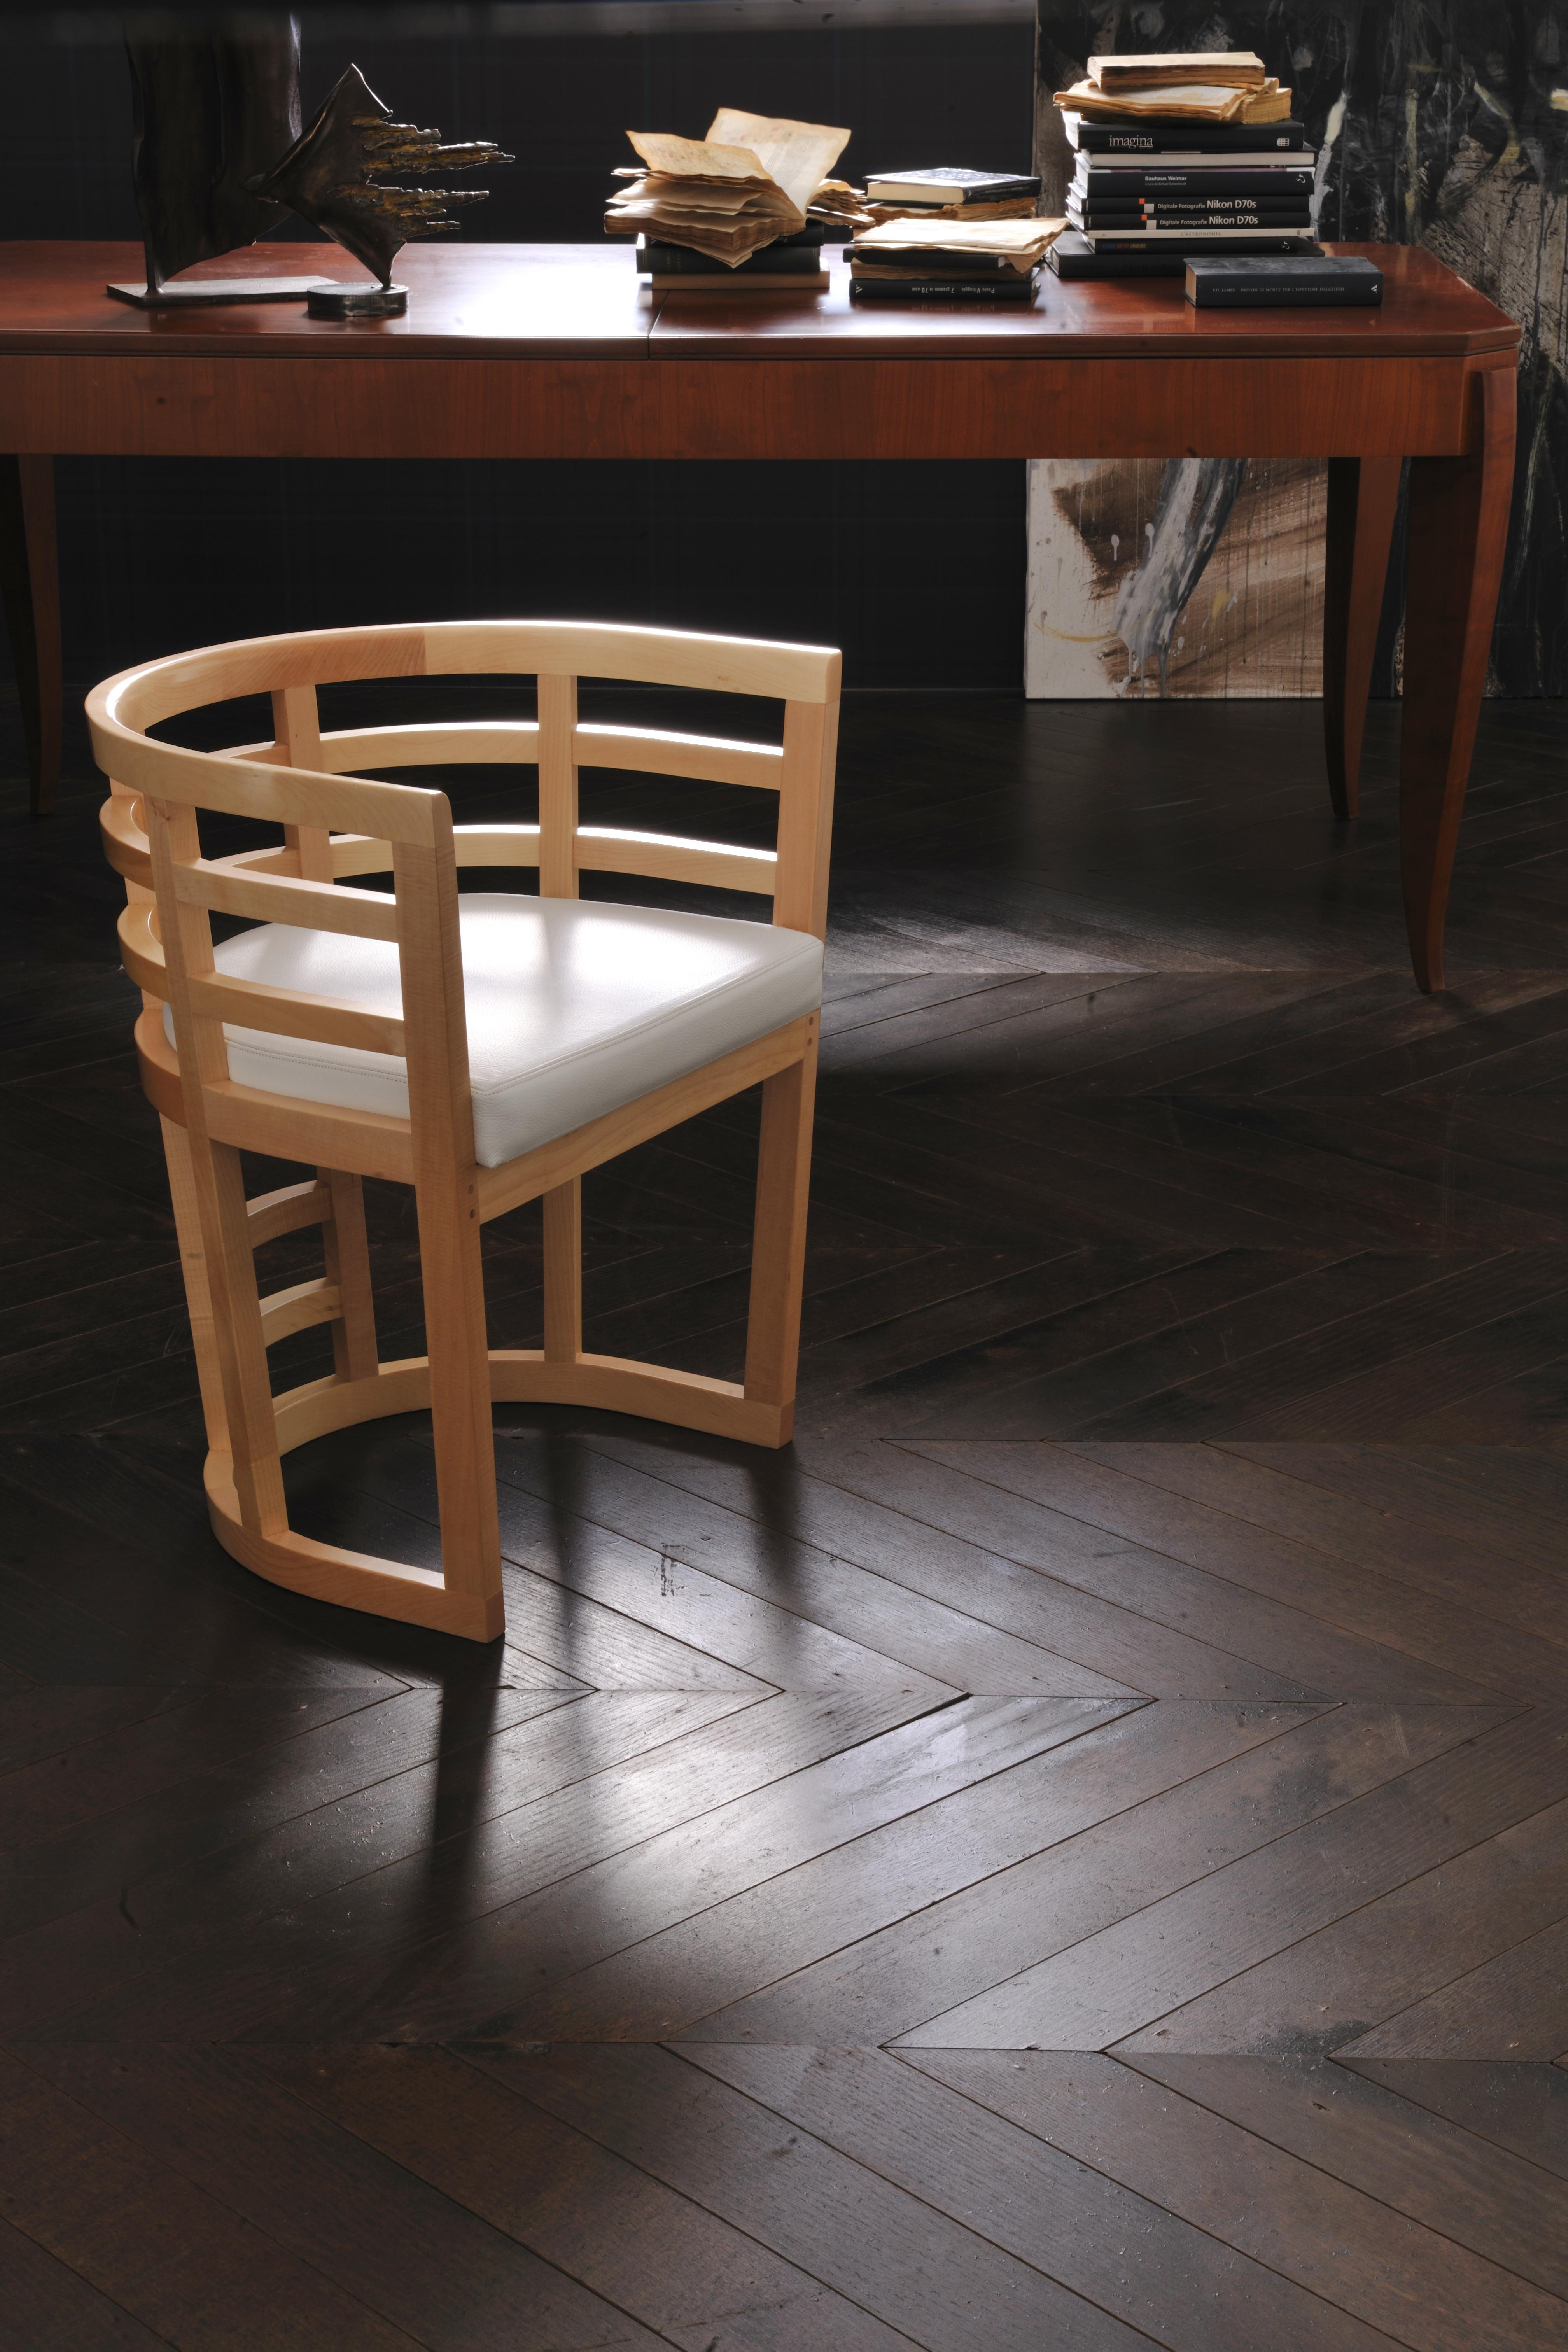 Italian Contemporary Armchair Made of Maple Wood with Padded Seat, design Franco Poli